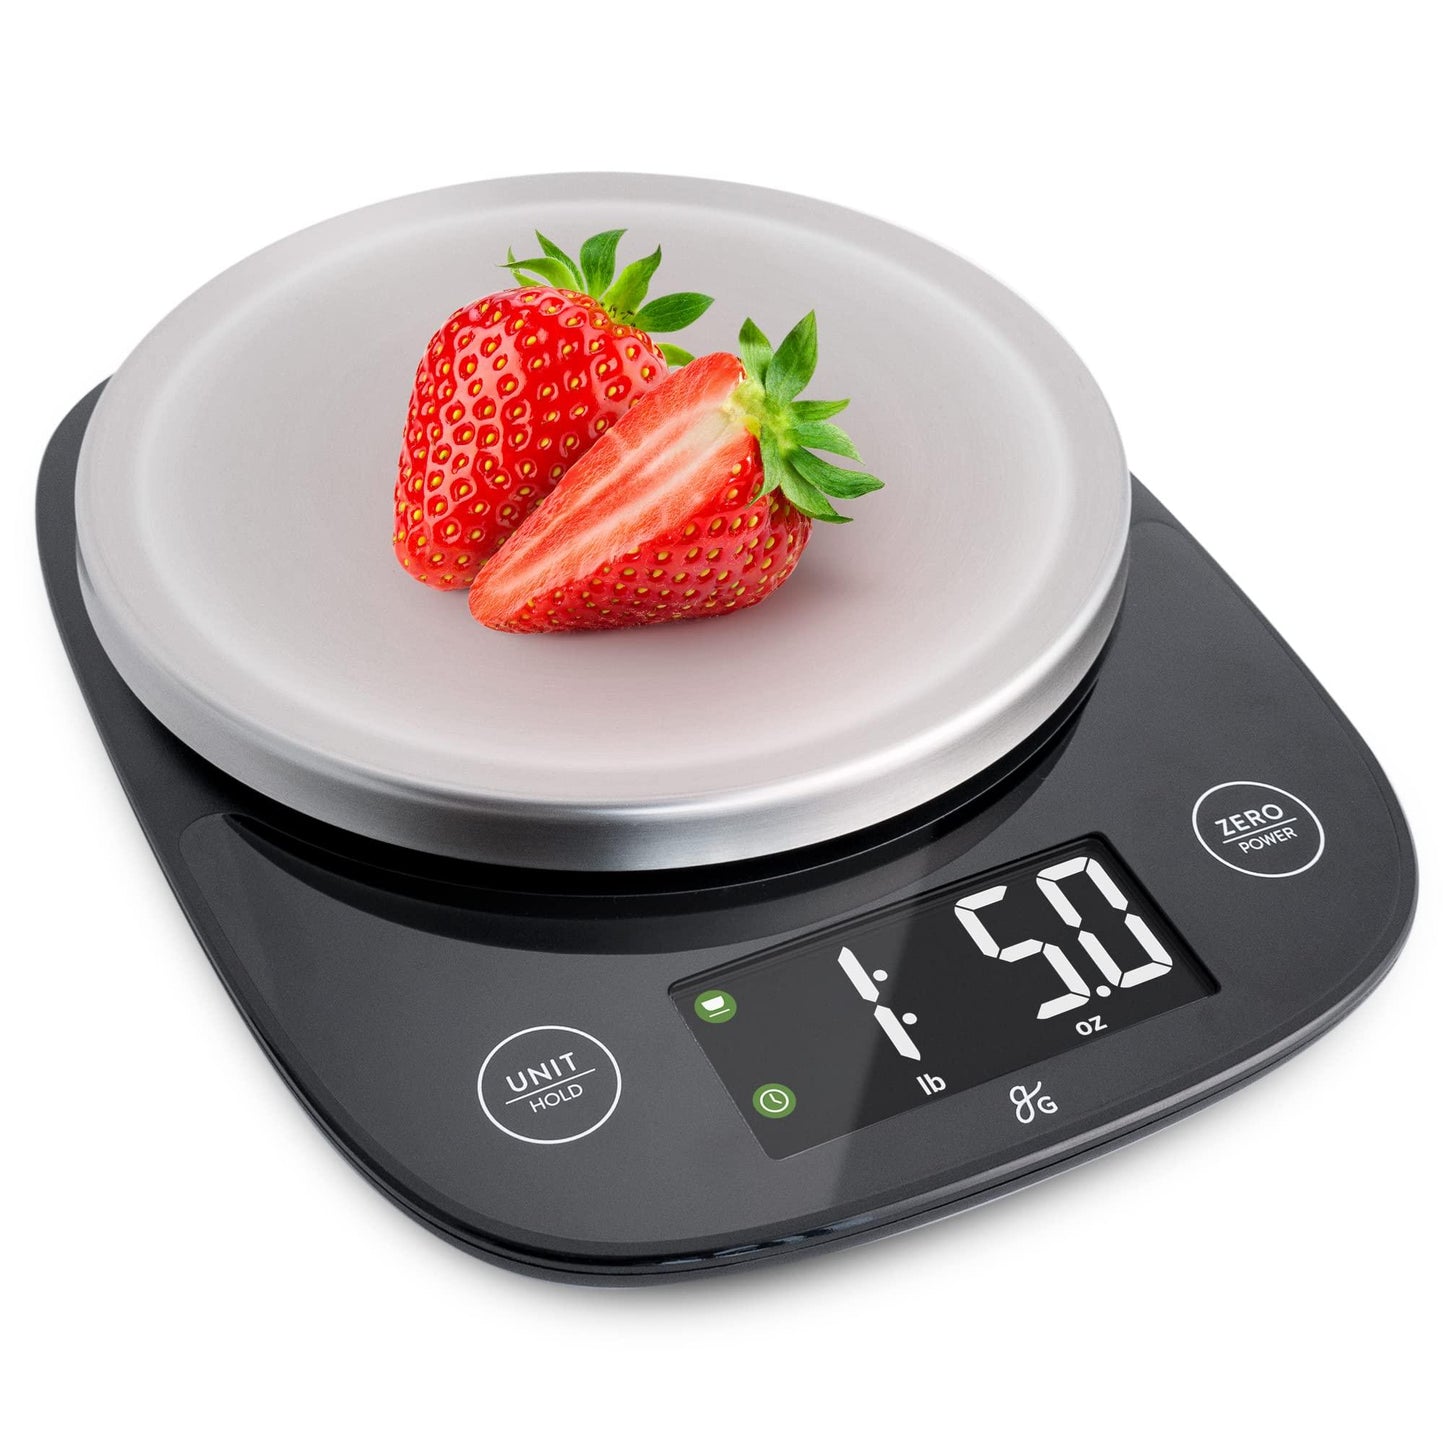 Greater Goods Premium Baking Scale, Ultra Accurate, Digital Kitchen Scale, Prep Baked Goods, Weigh Food and Coffee, or Use for Meal Prep, Four Units of Measurement, Designed in St. Louis - CookCave